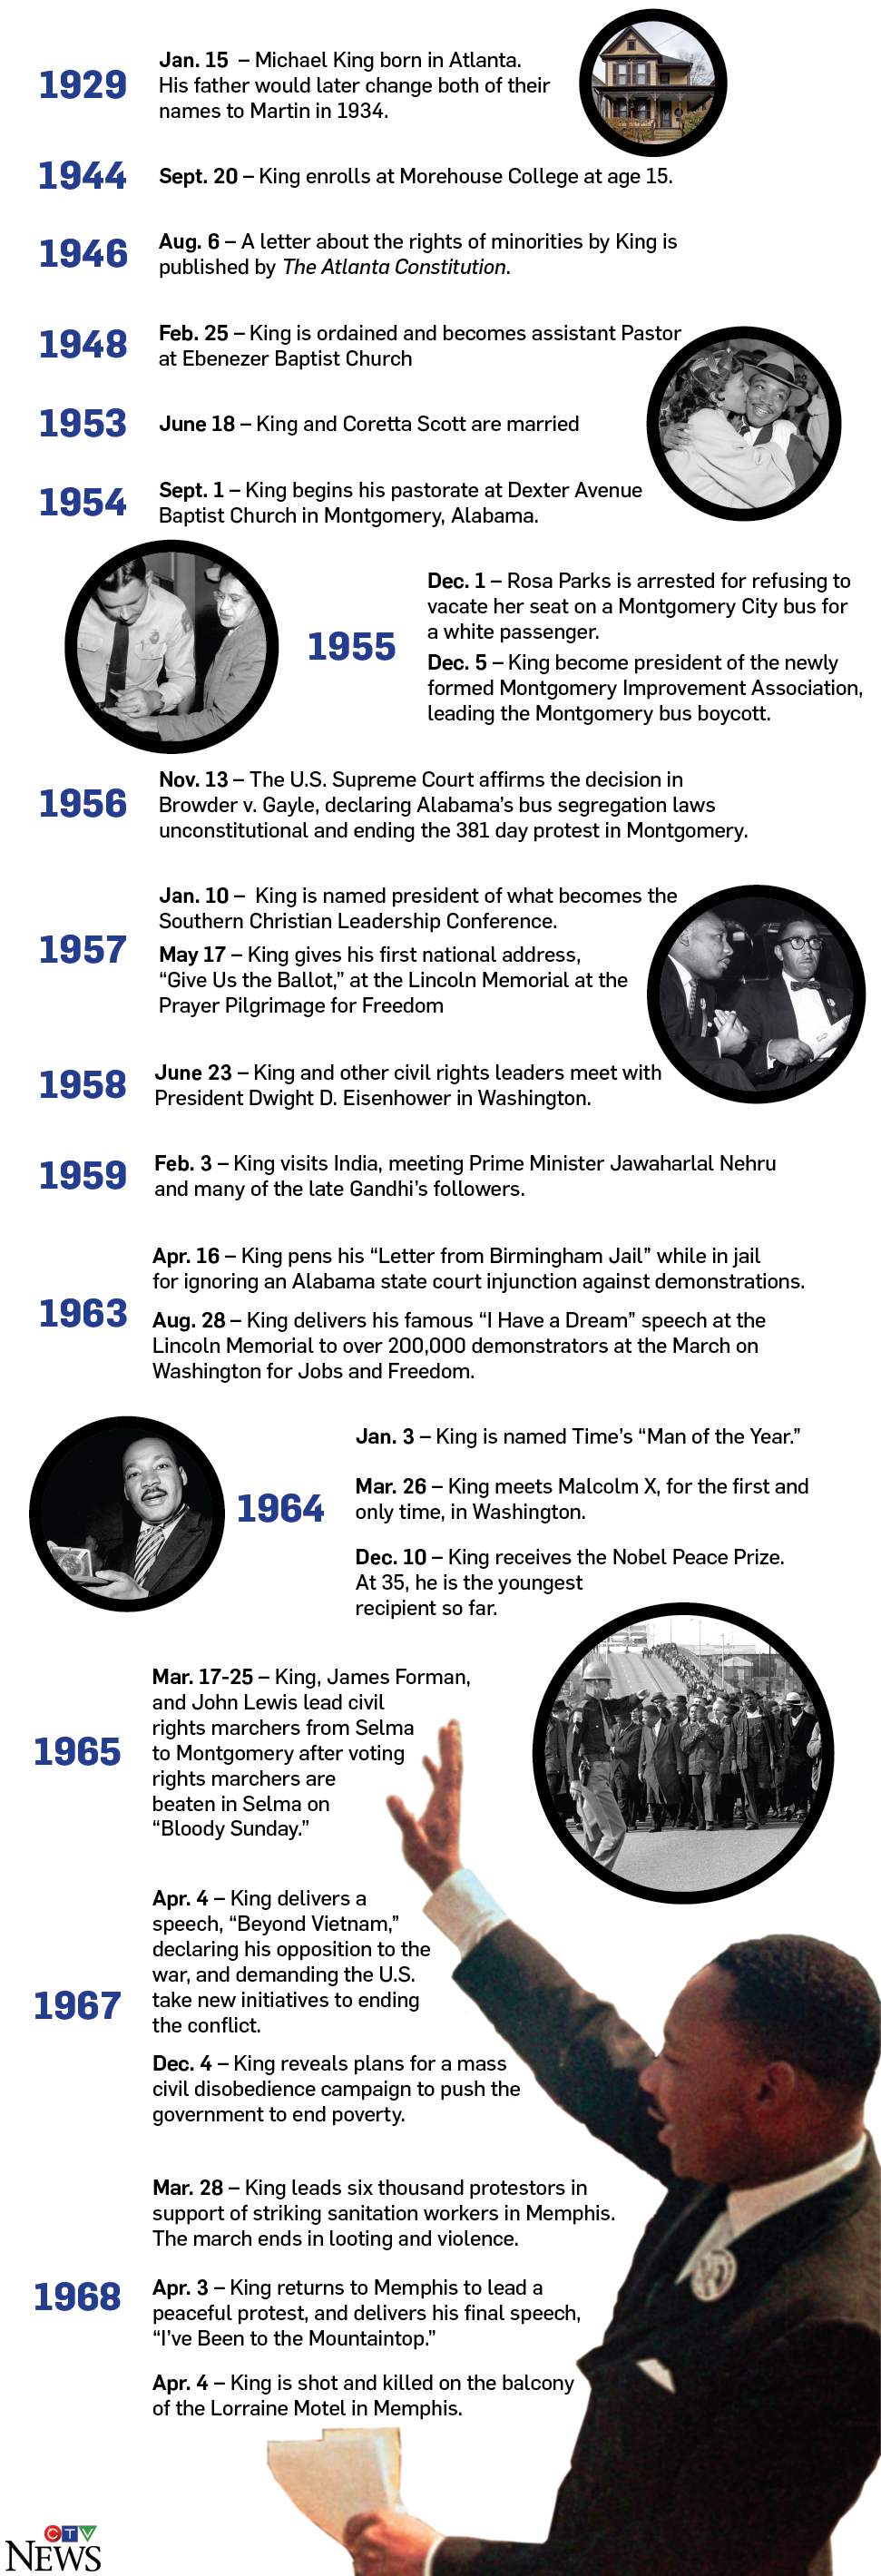 Timeline Major Events In The Life Of Martin Luther King Jr Ctv News